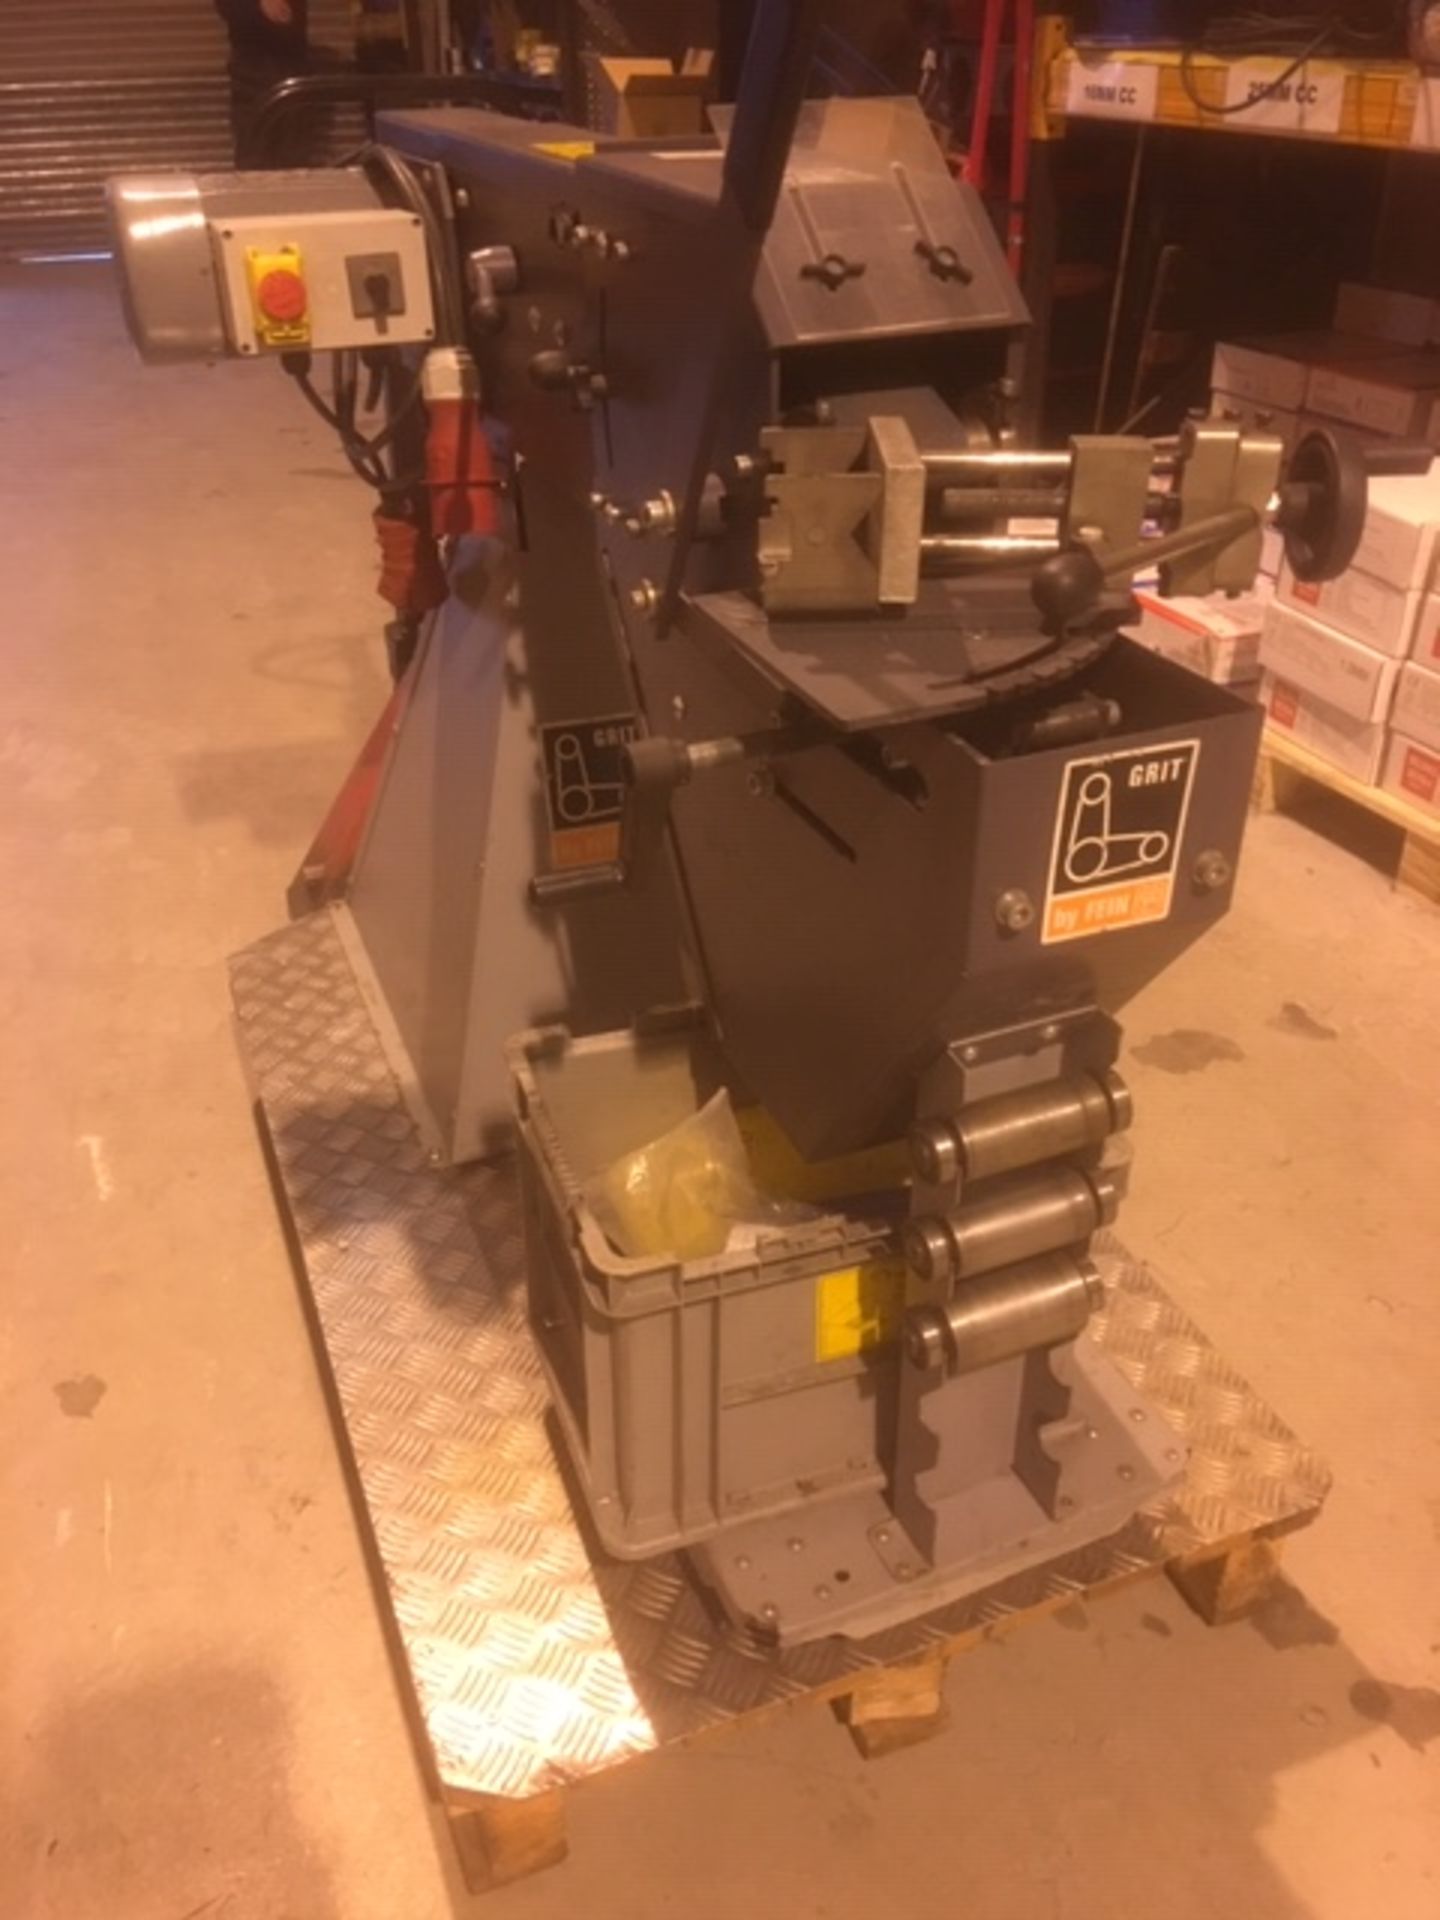 Fein-Grit GXR Notching Attachment, serial no. H1625, fitted to the Grit GI75 2H two speed Linisher/